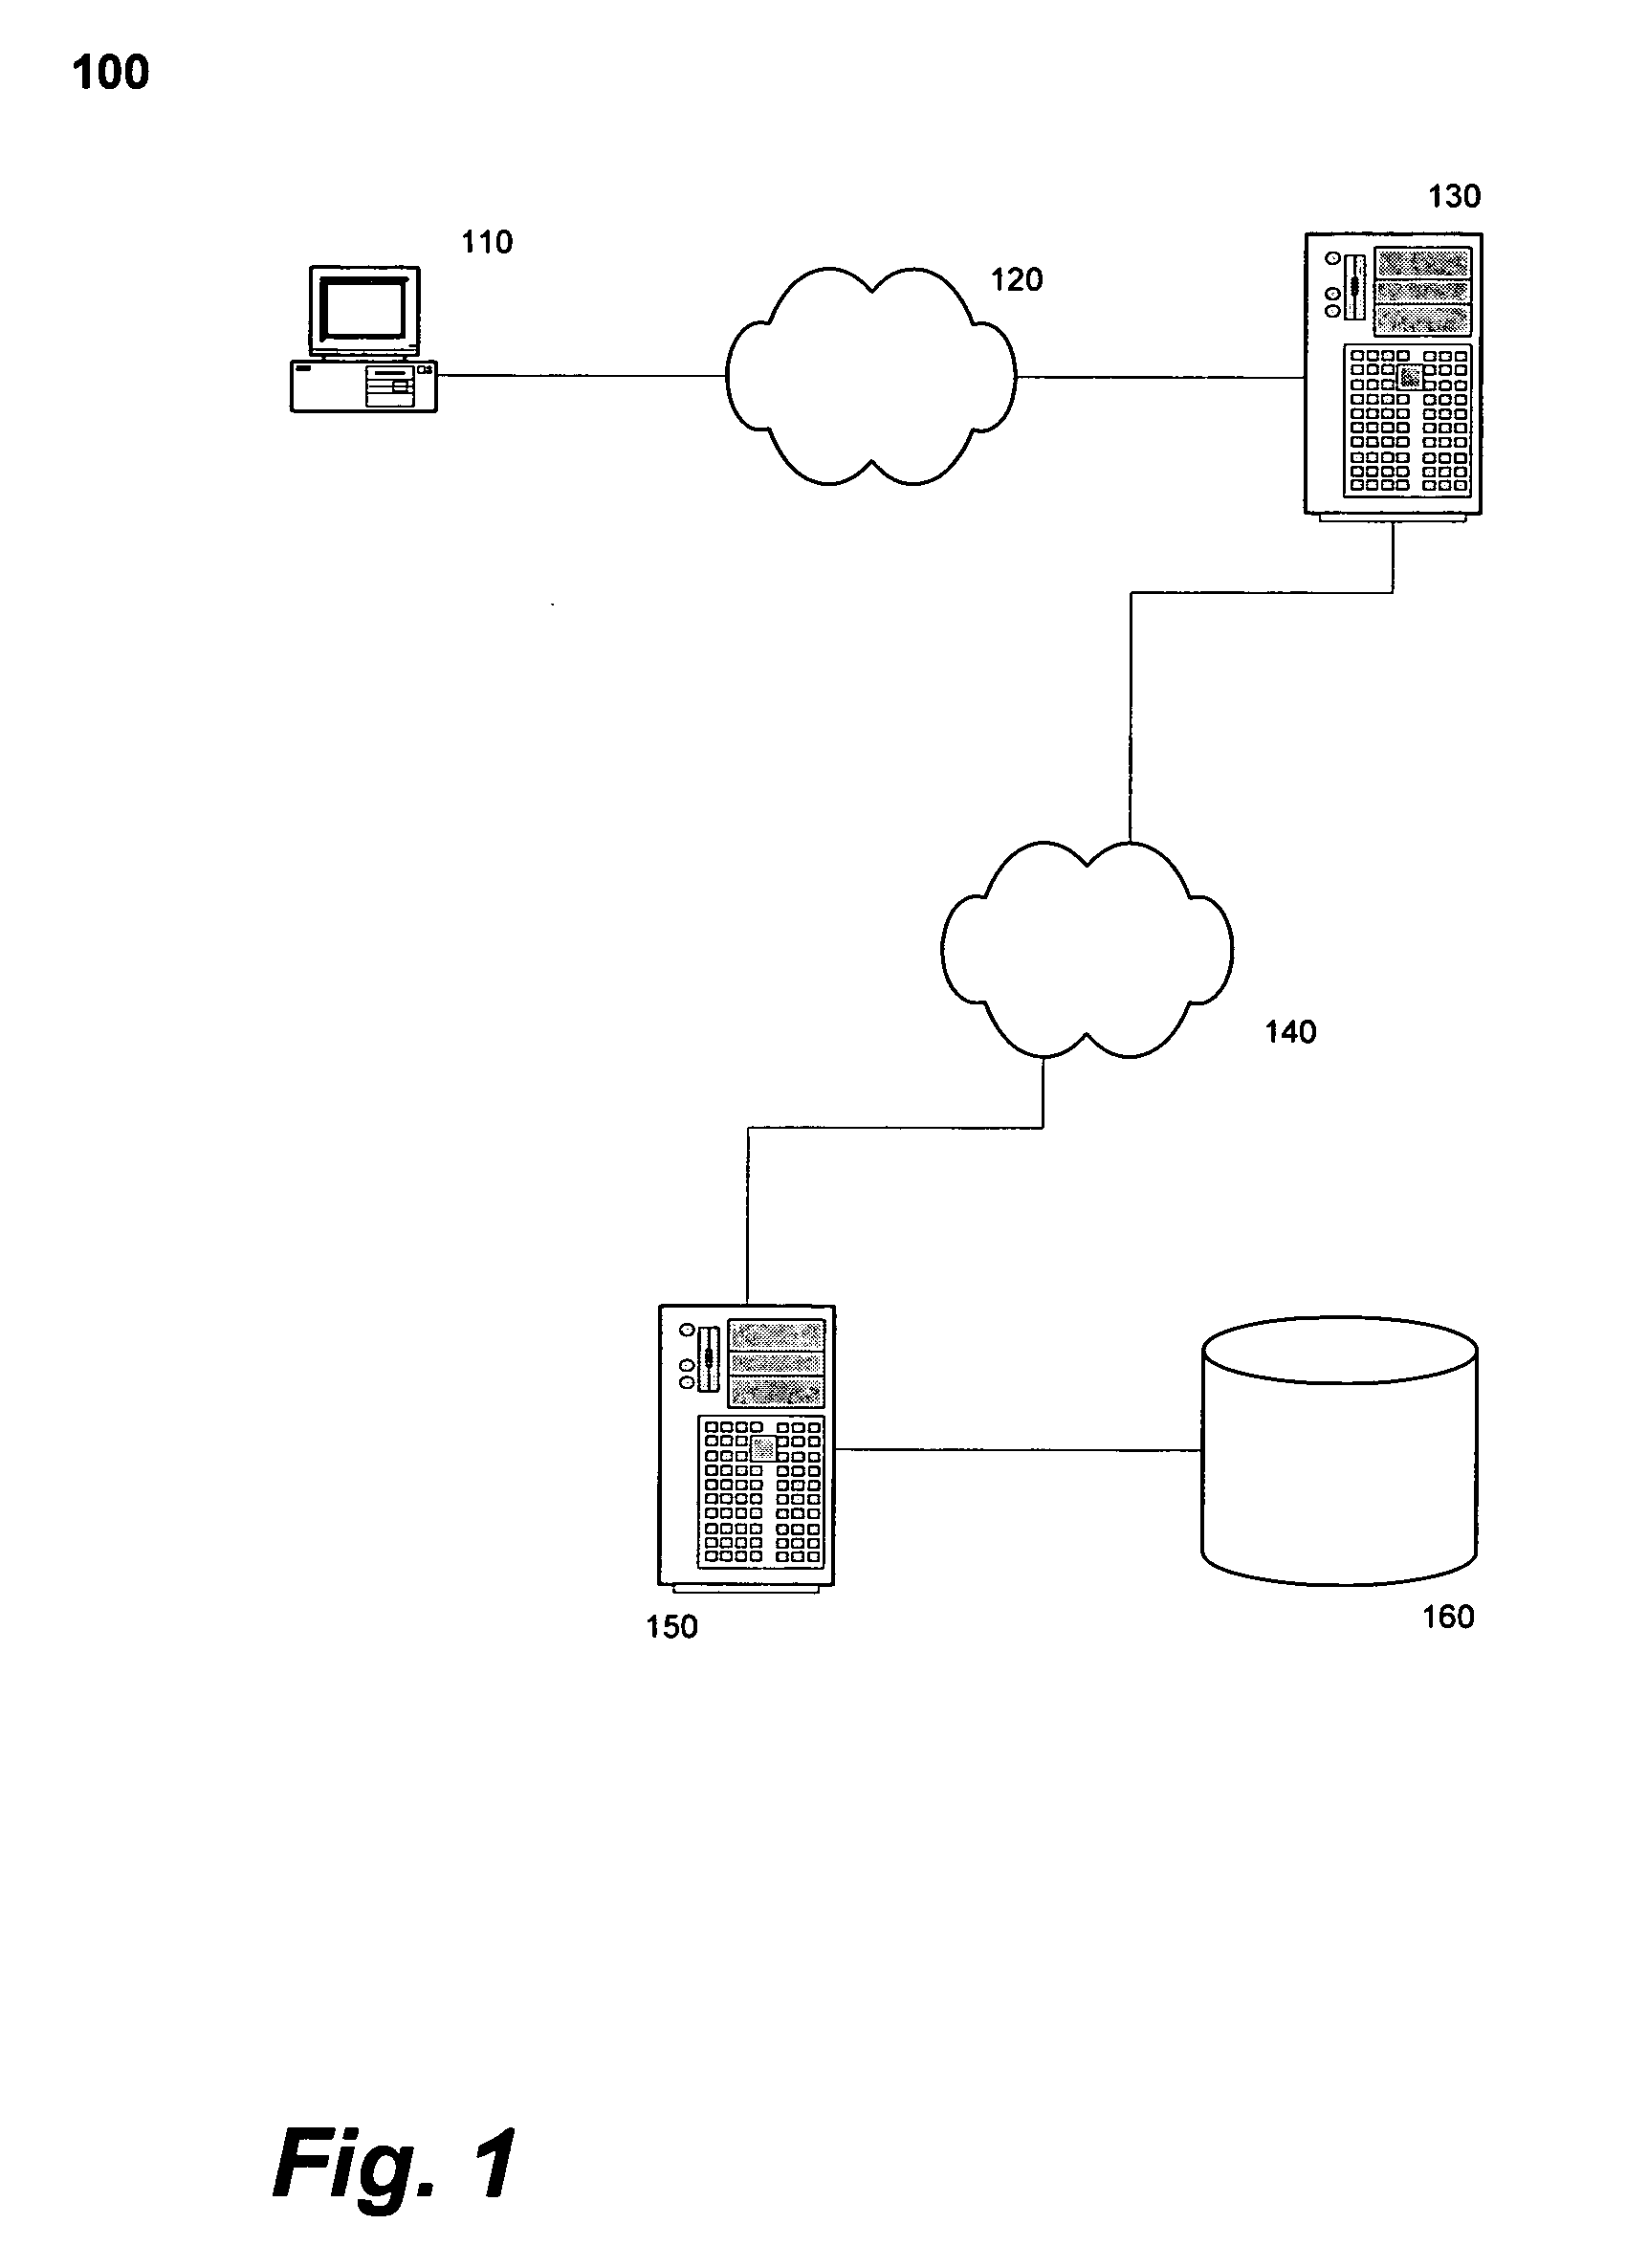 System and method for generating production-quality data to support software testing